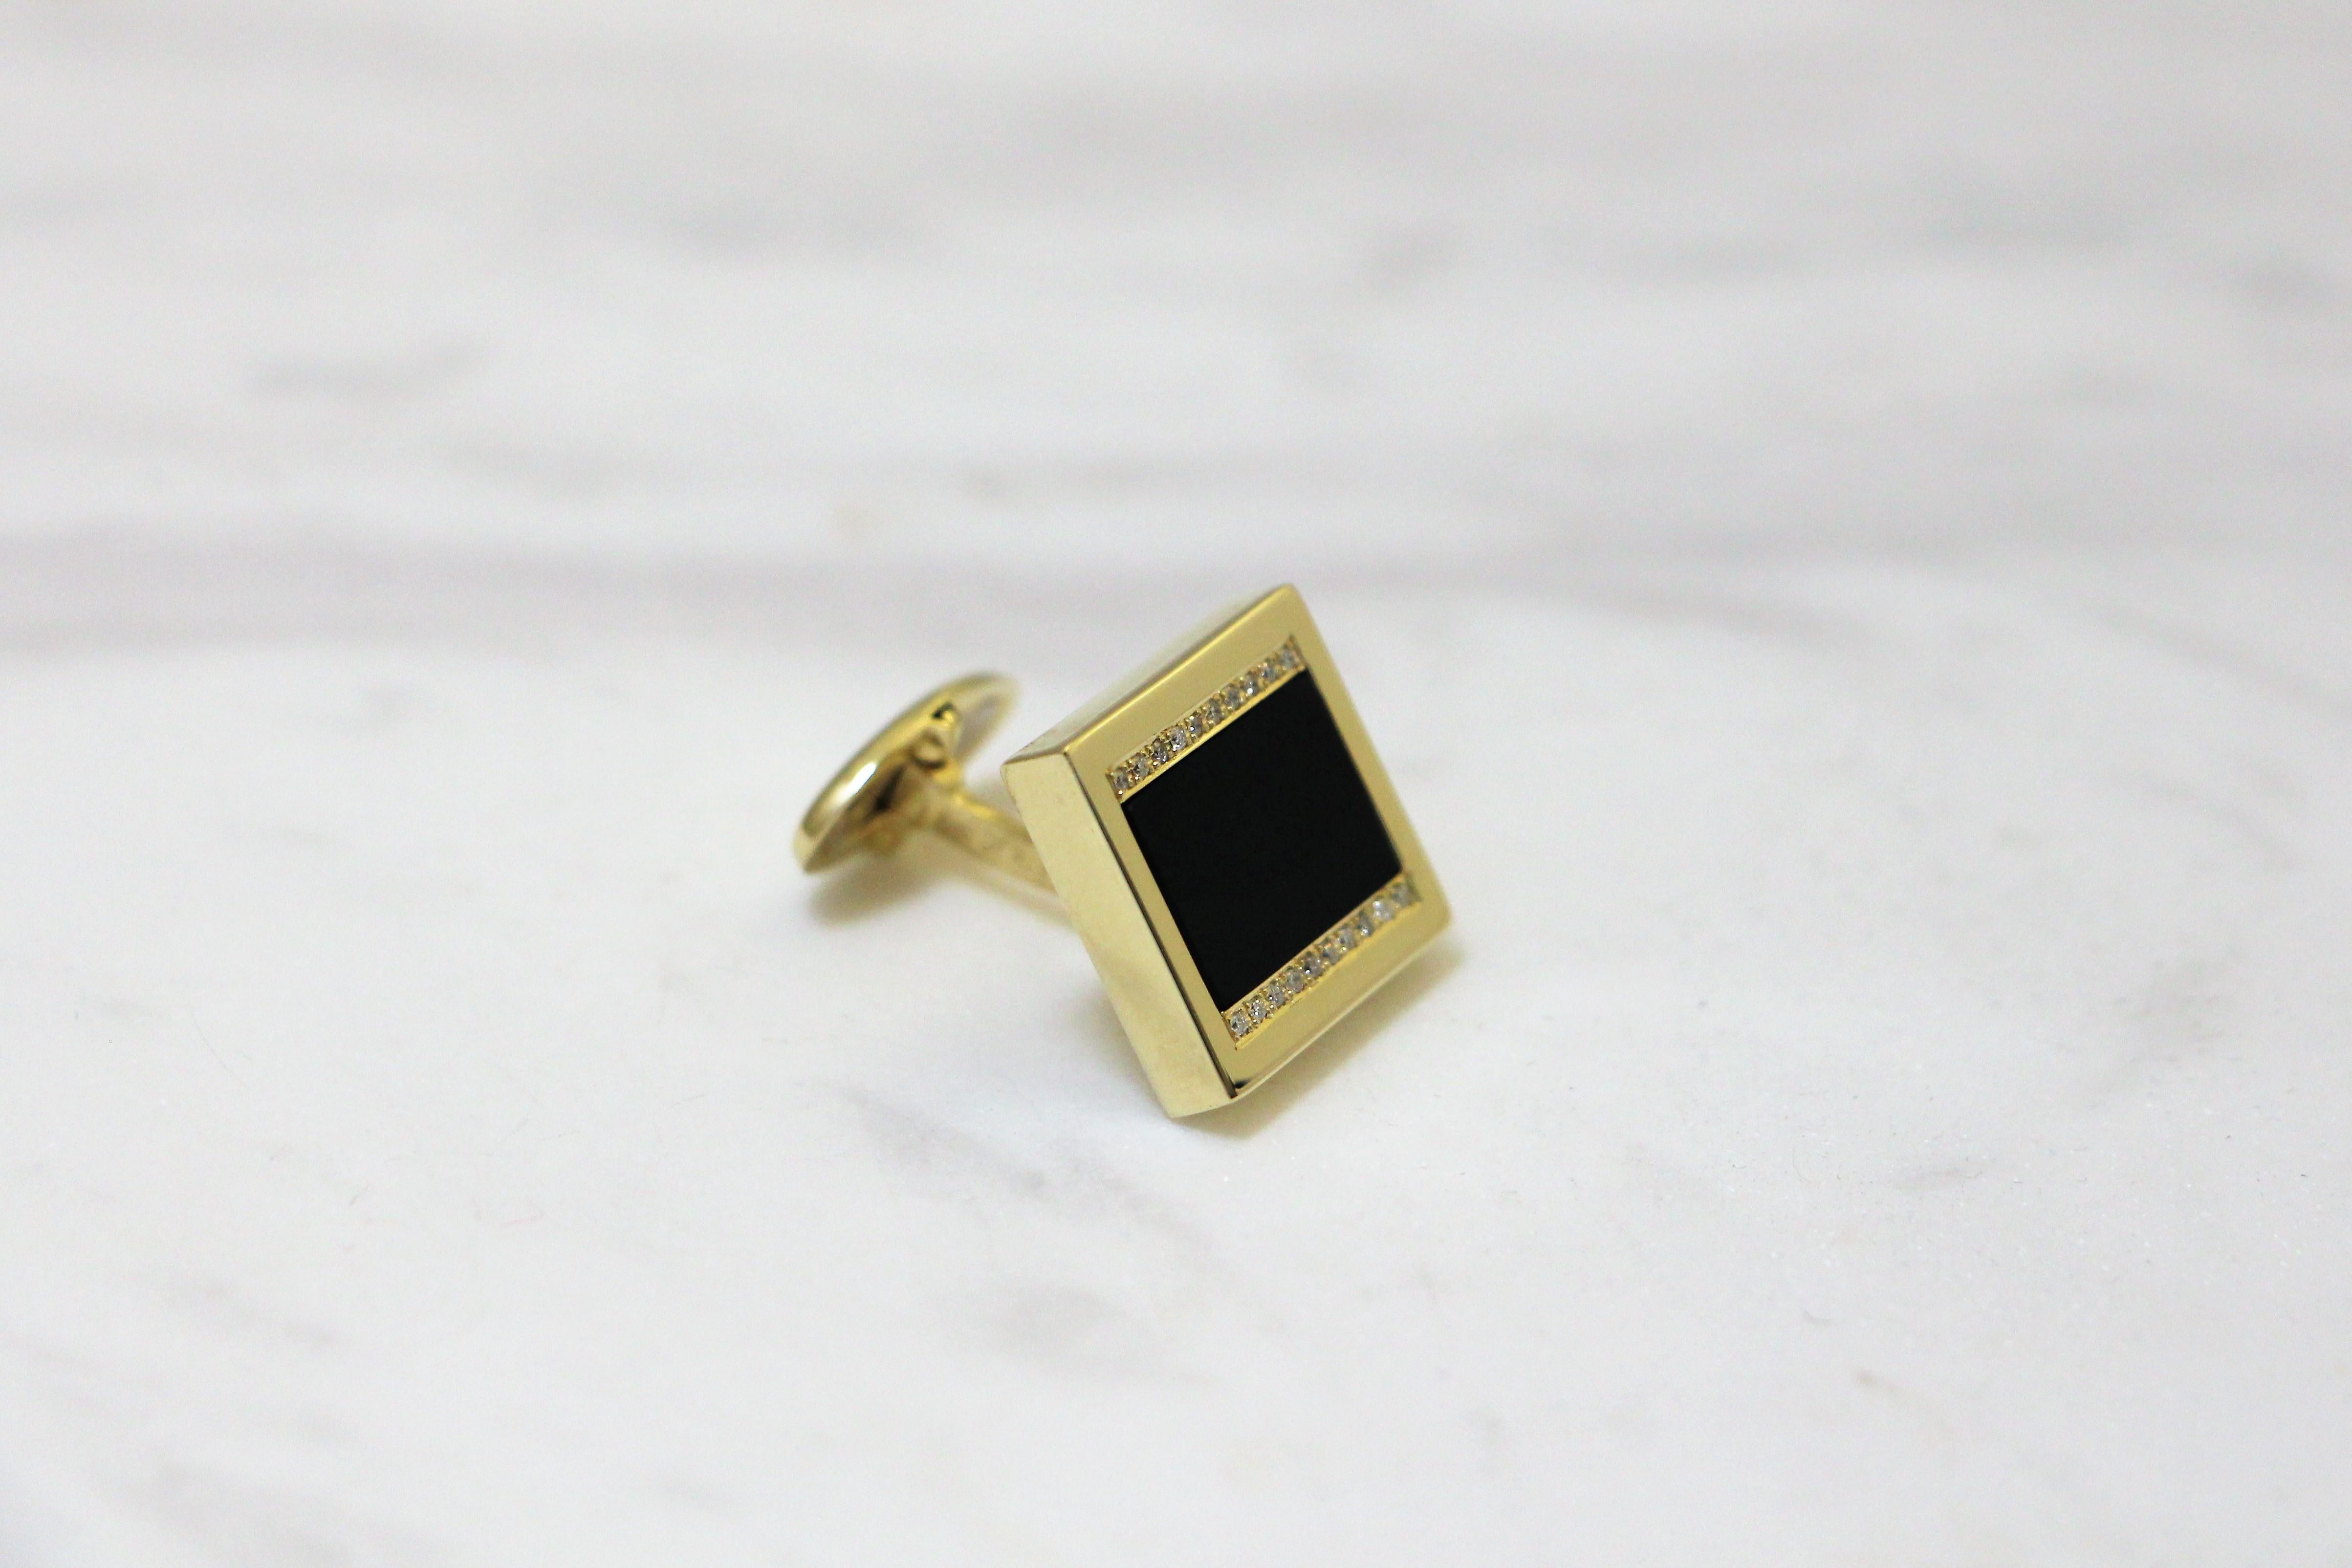 Square cufflinks with brilliant cut diamonds featuring a black onyx and two elegant lines of pave brilliant cut diamonds 0.16 carat. The Black Onyx and the gold combination captures the eternal spirit of fashion with timeless sophistication. These